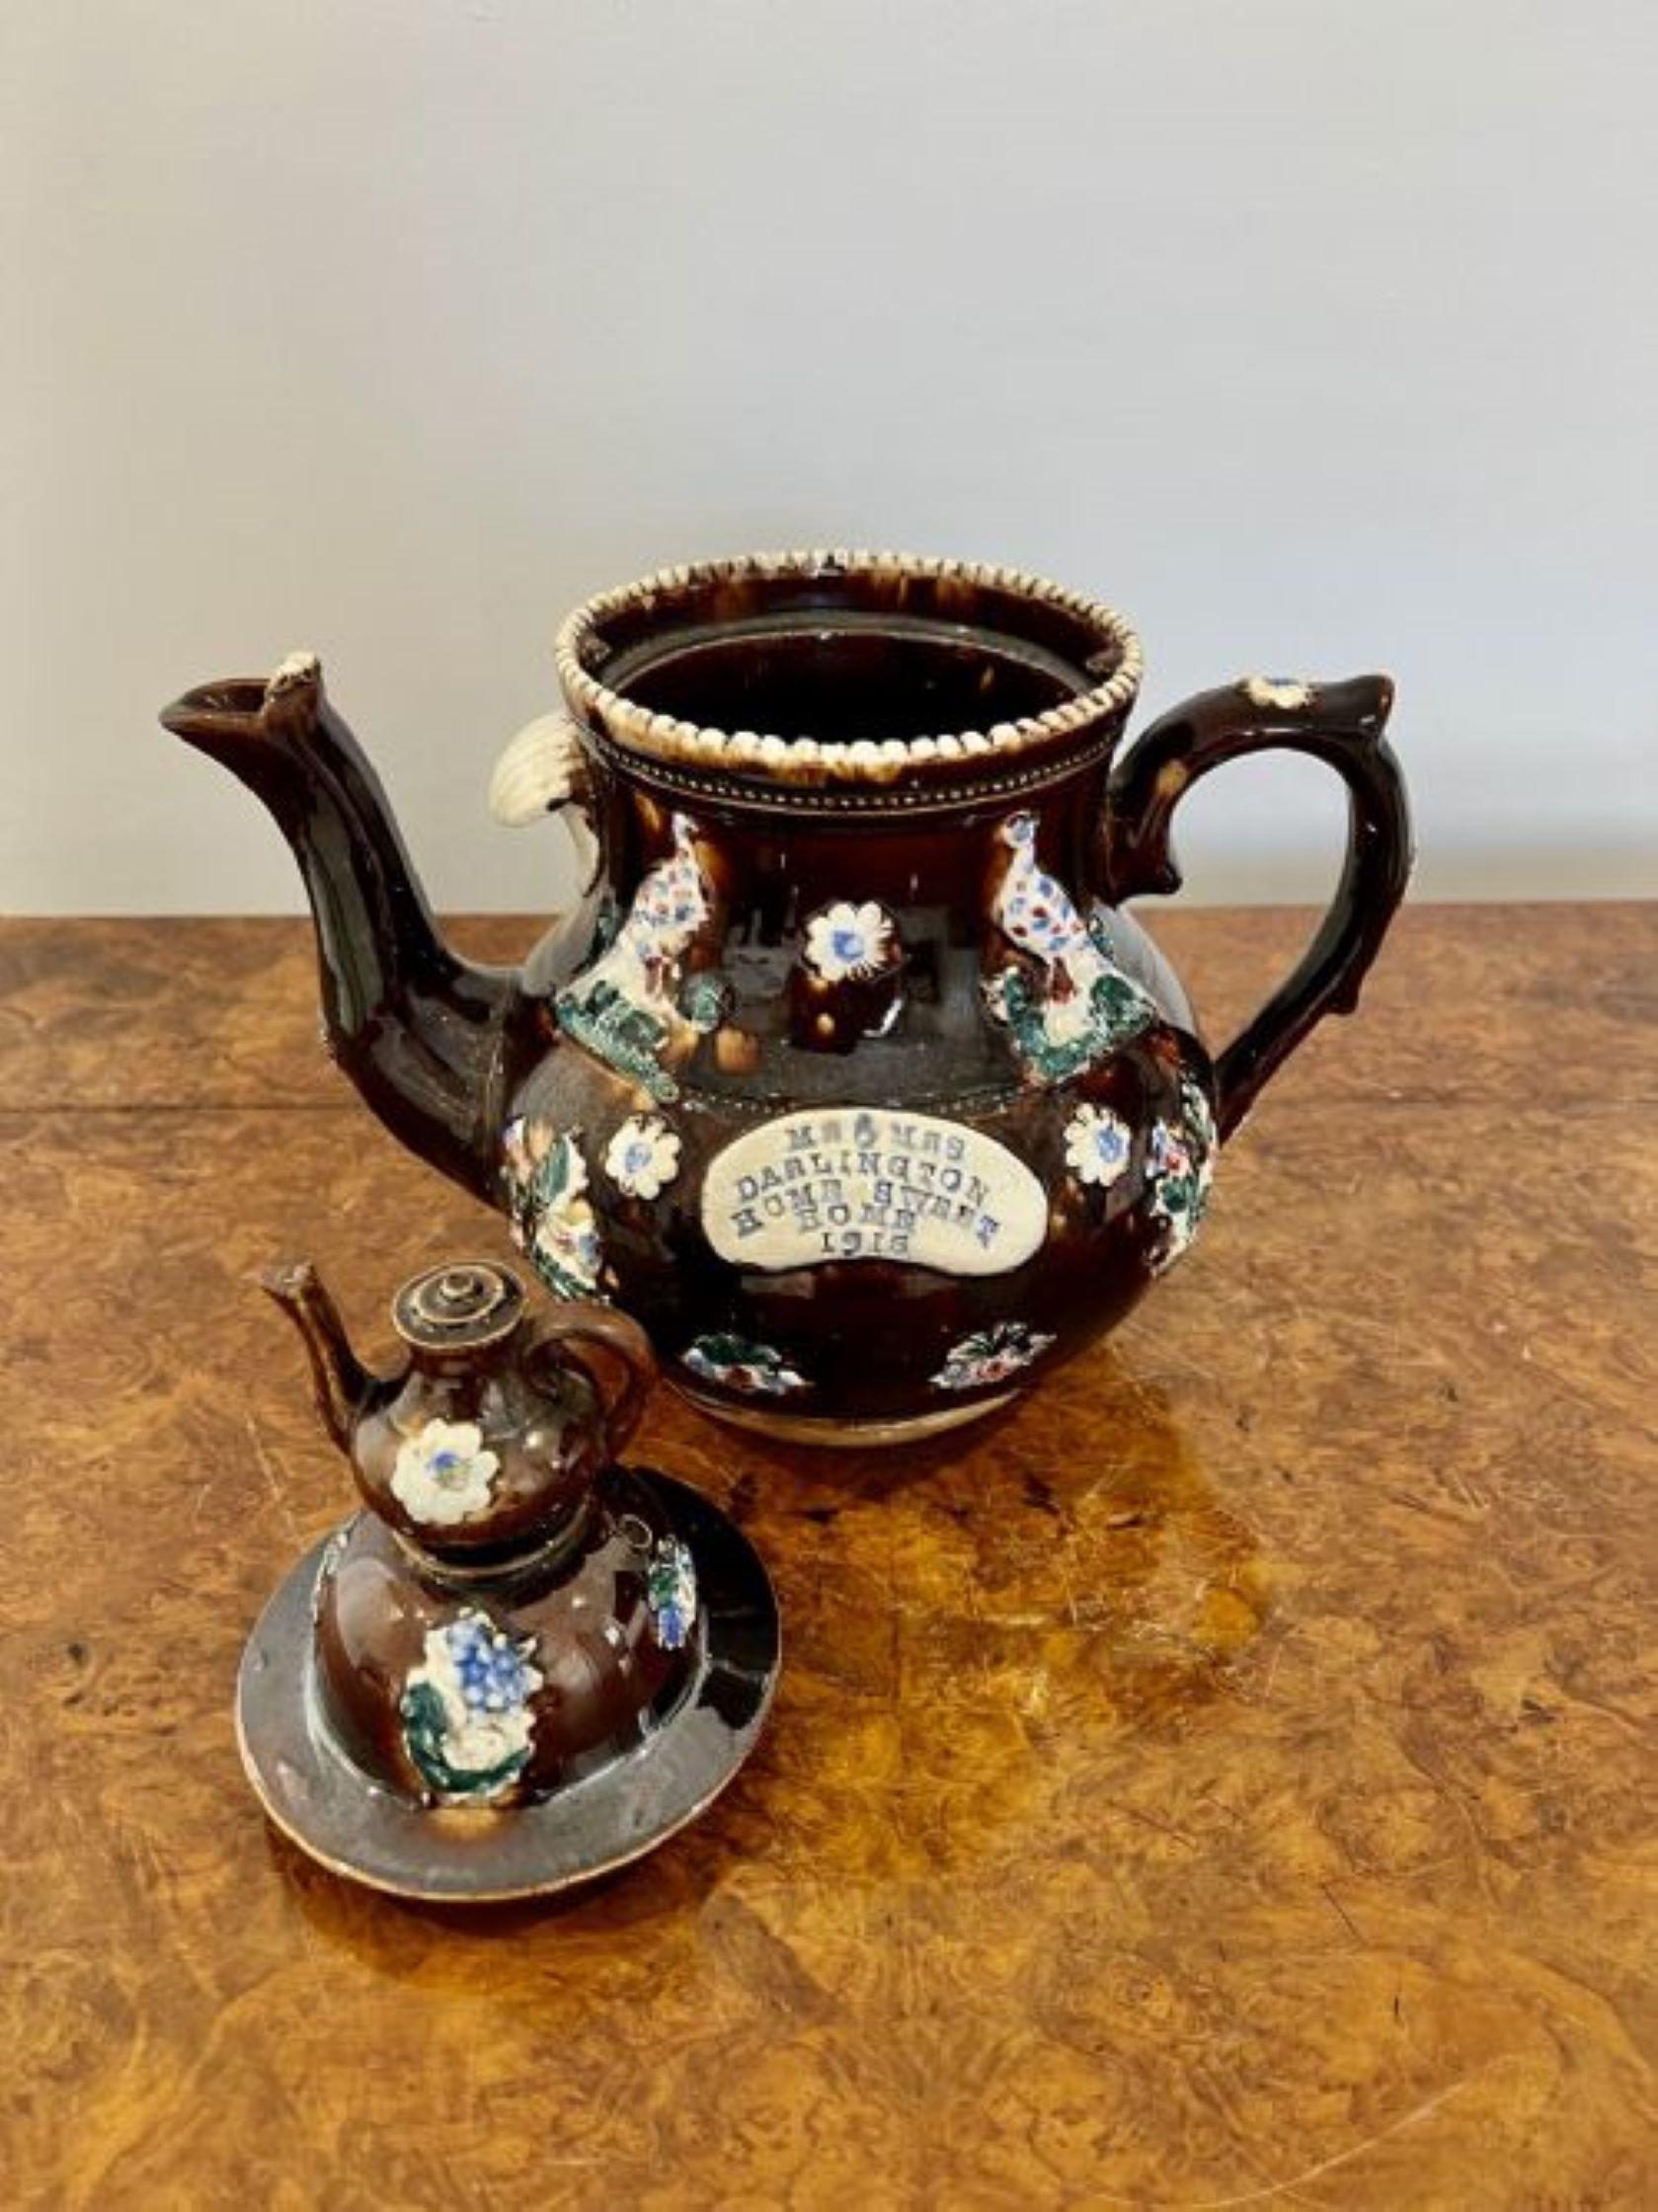 Large unusual antique tea pot with 'Mr & Mrs Darlington home sweet home 1915' inscribed on a brown teapot decorated in wonderful birds and flowers in blue, green, white, yellow and red colours, the lid having a small teapot with a shaped handle and